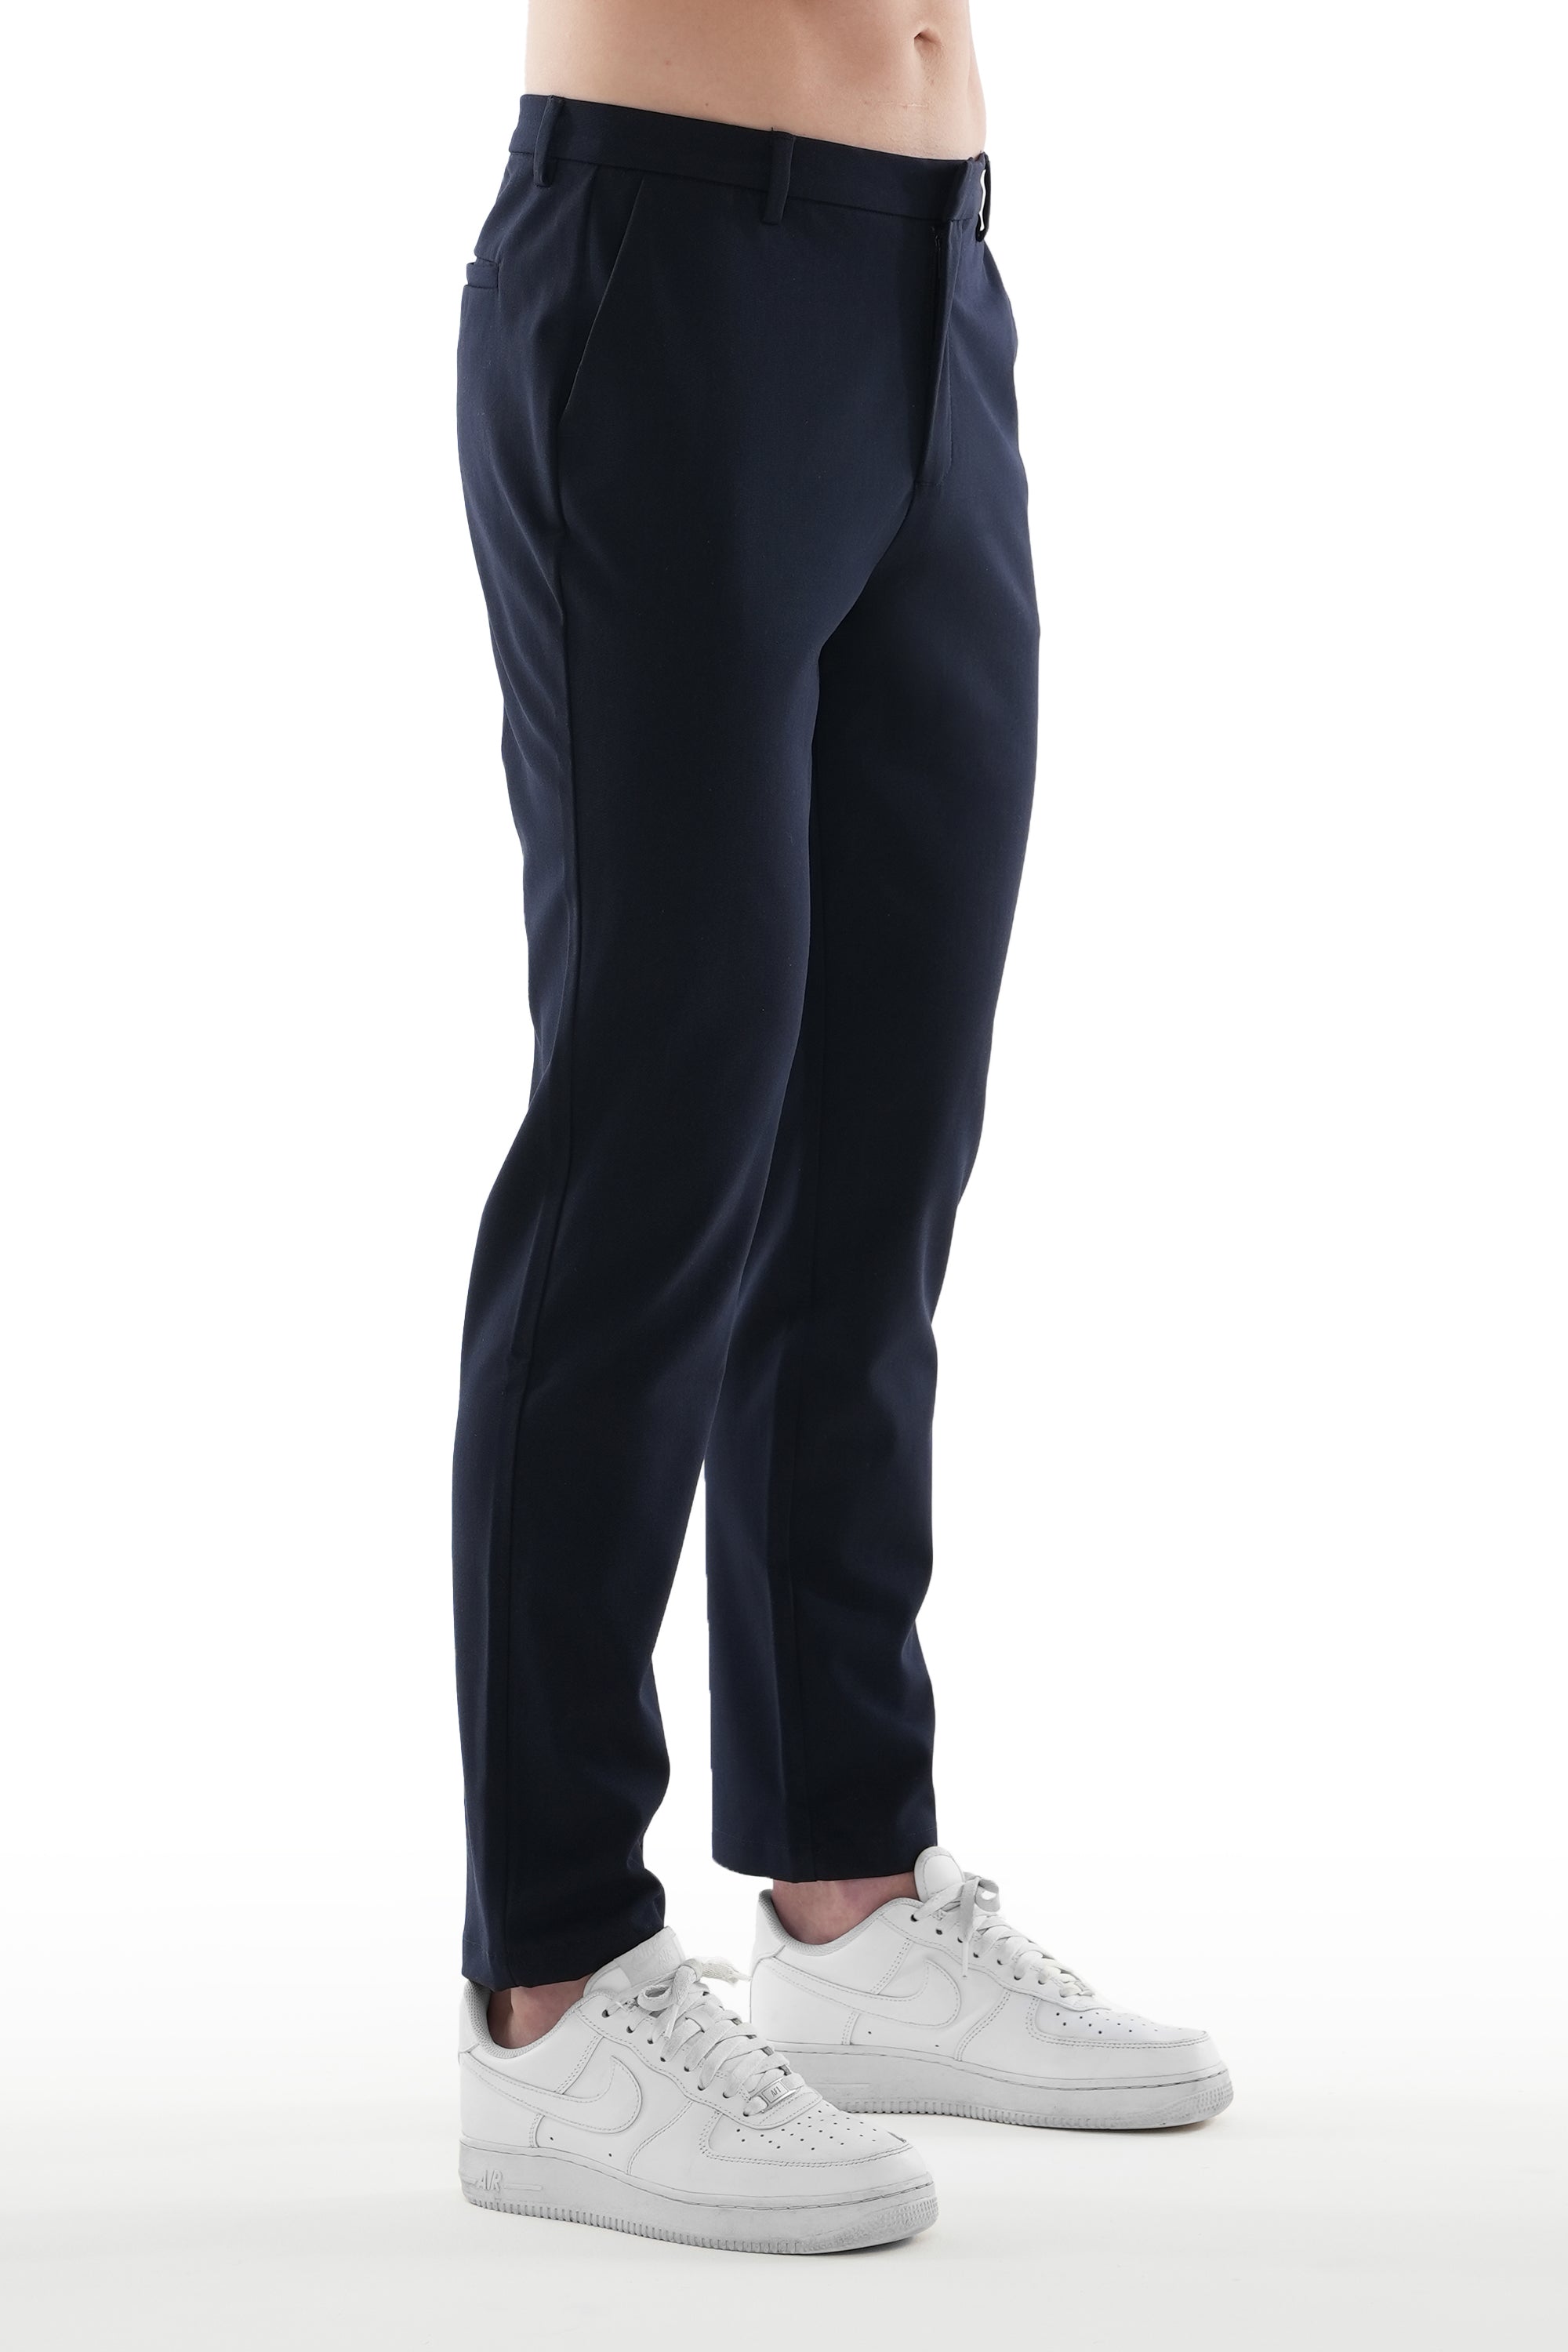 THE LUCIA TROUSERS - NAVY BLUE